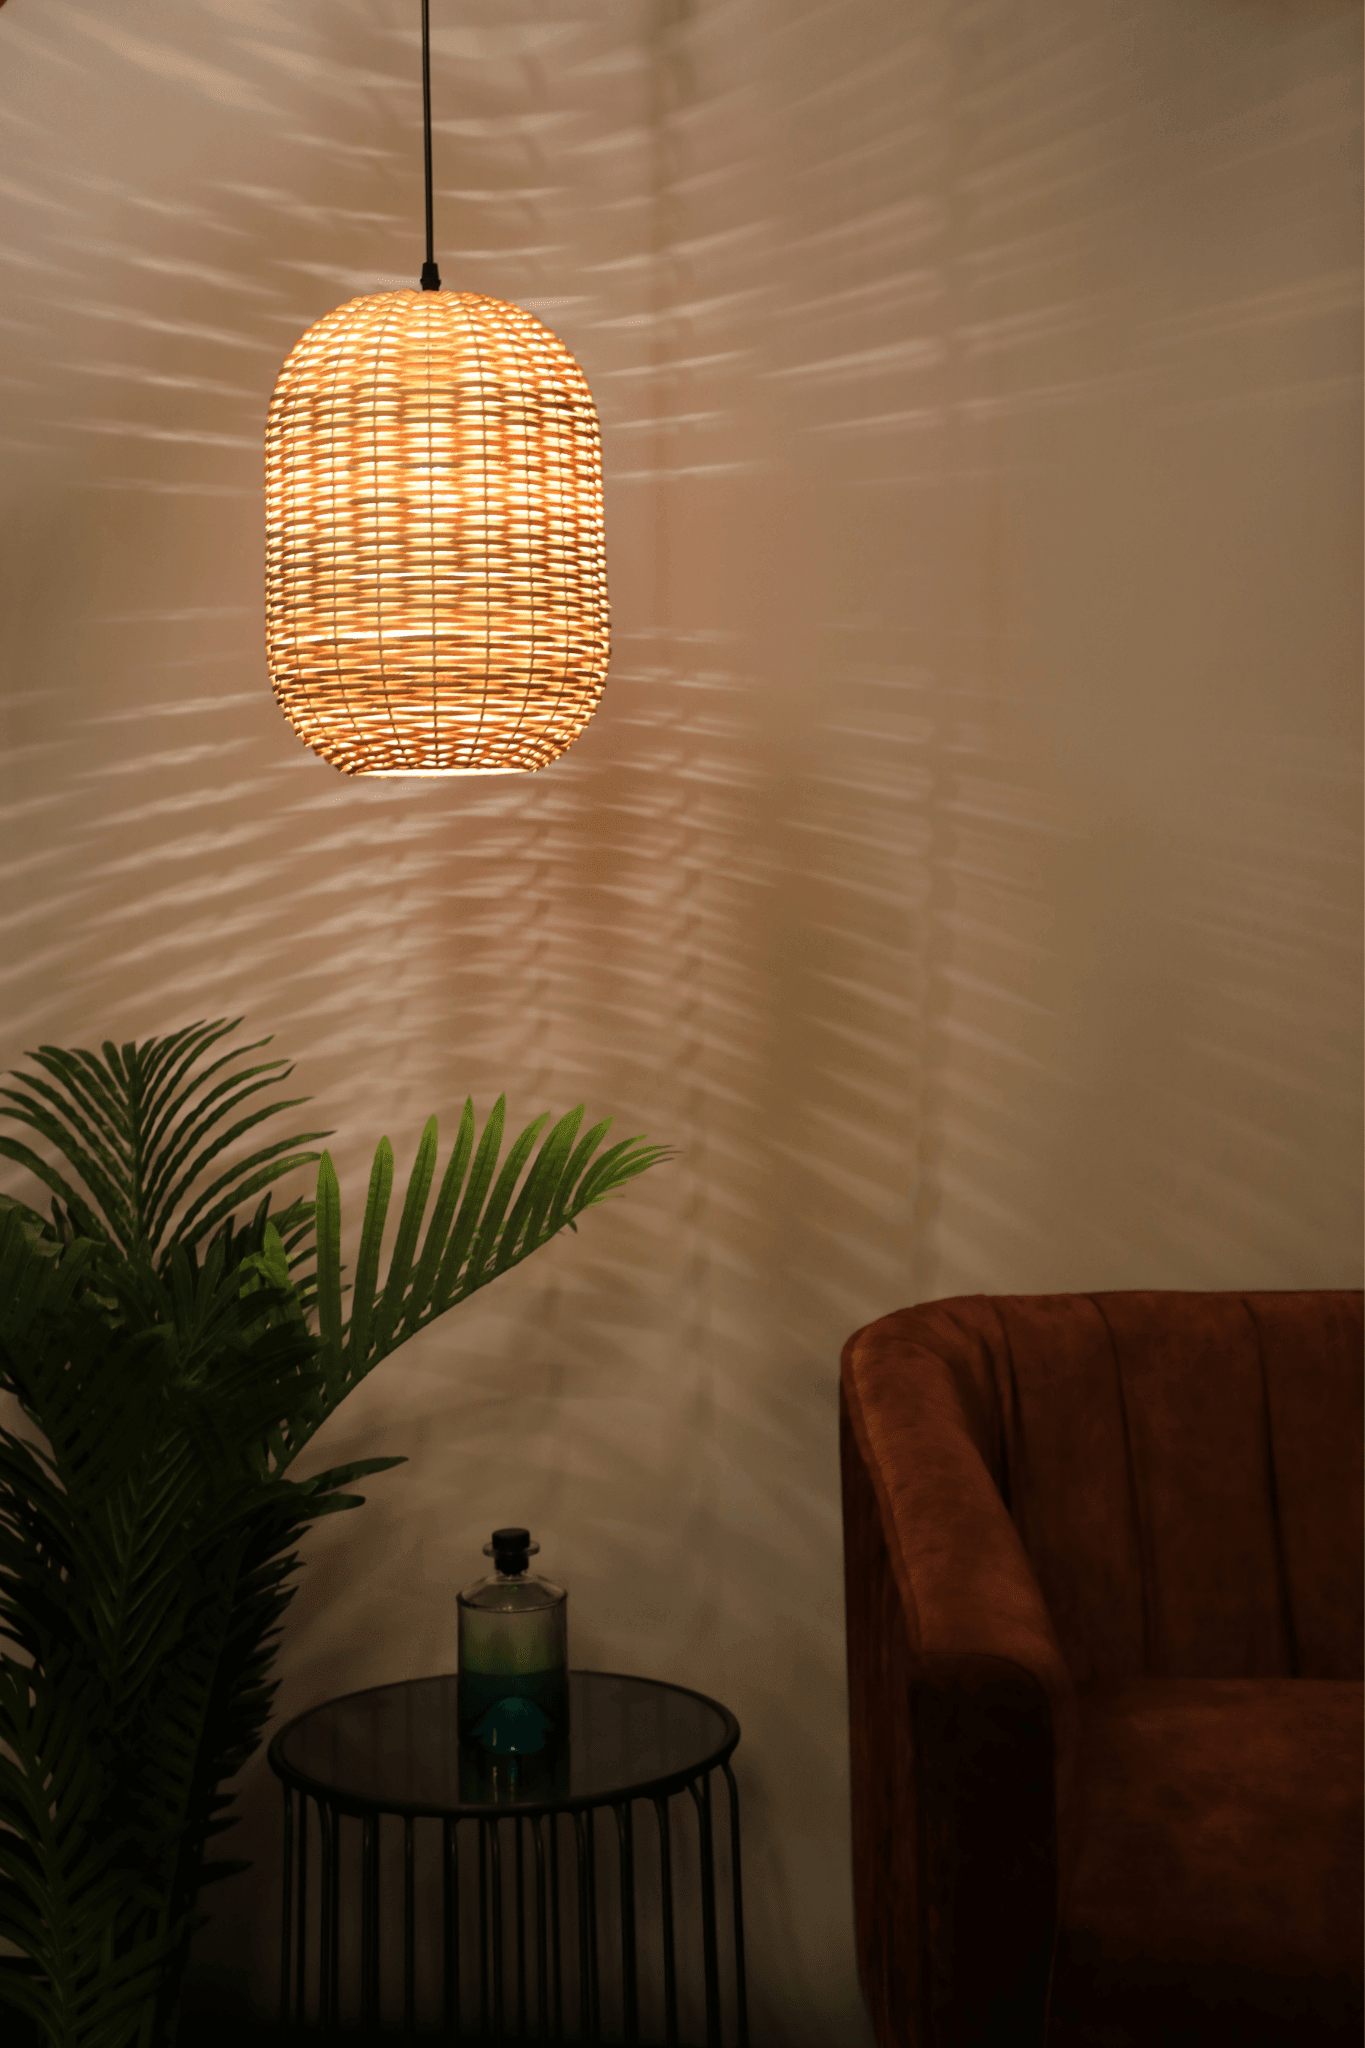 Aria Handcrafted Pendant Light by The Light Library